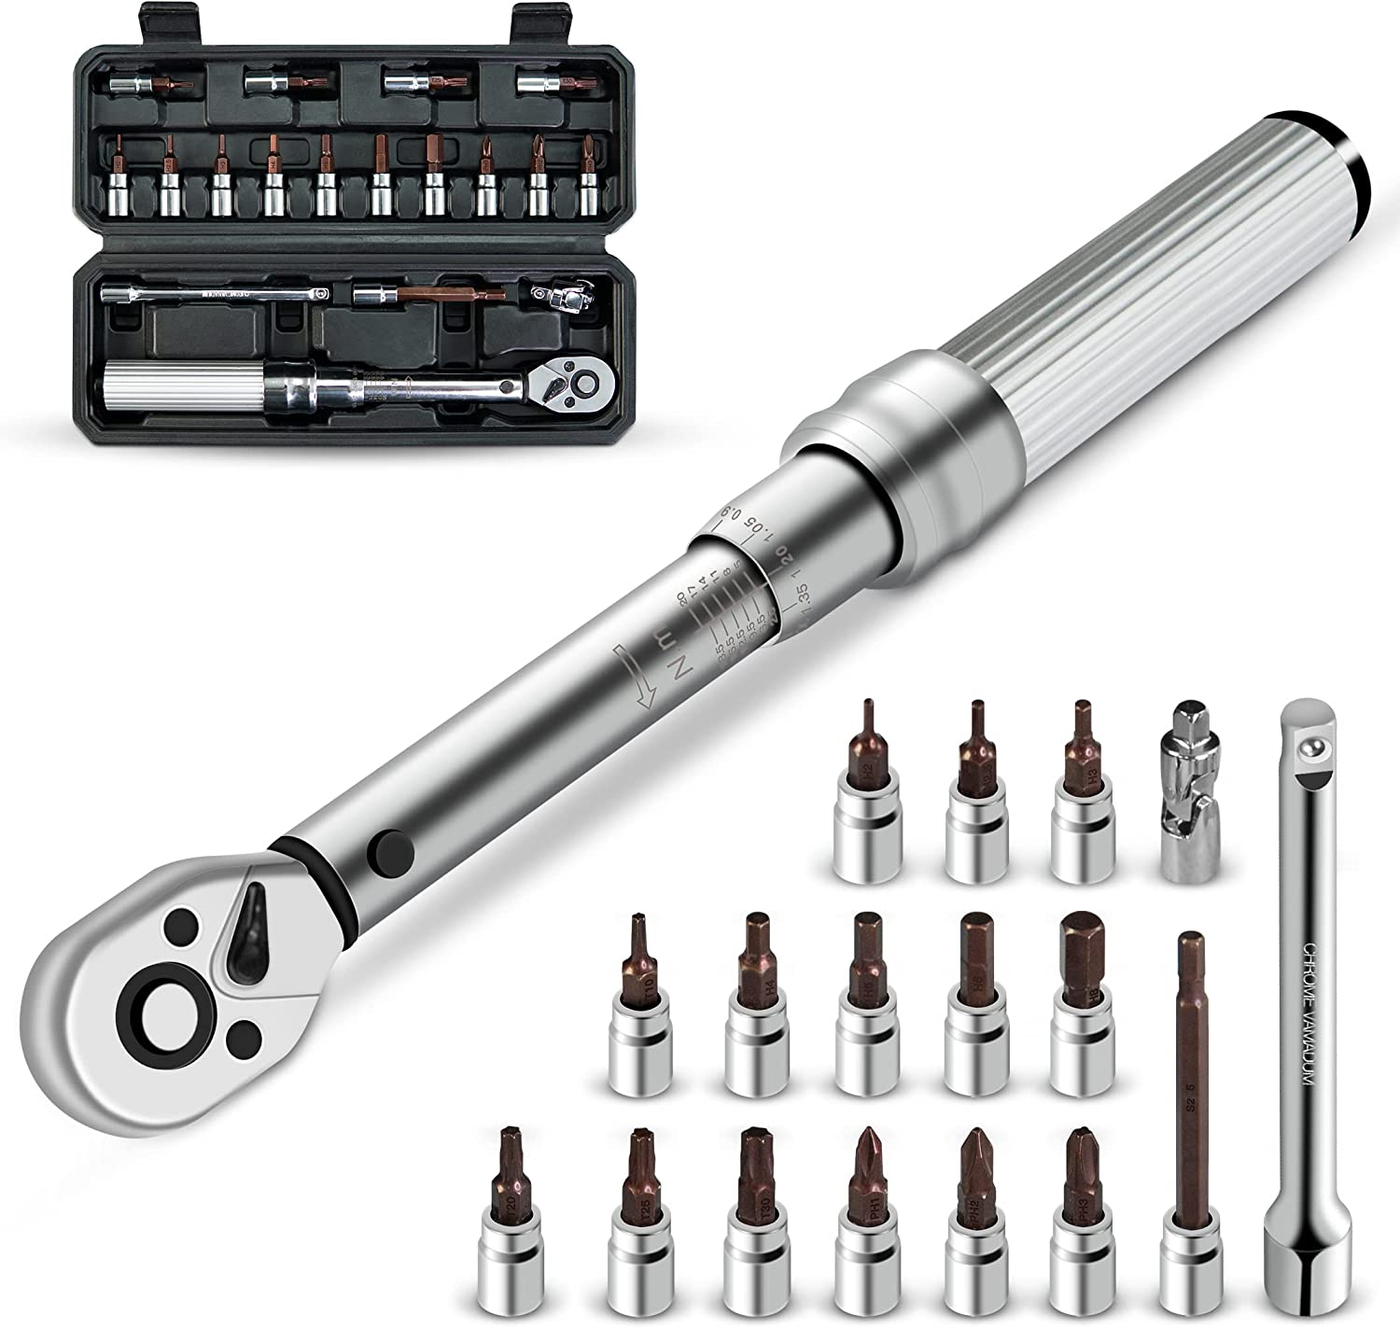 Cyberbike approved bicycle torque wrench kit with case